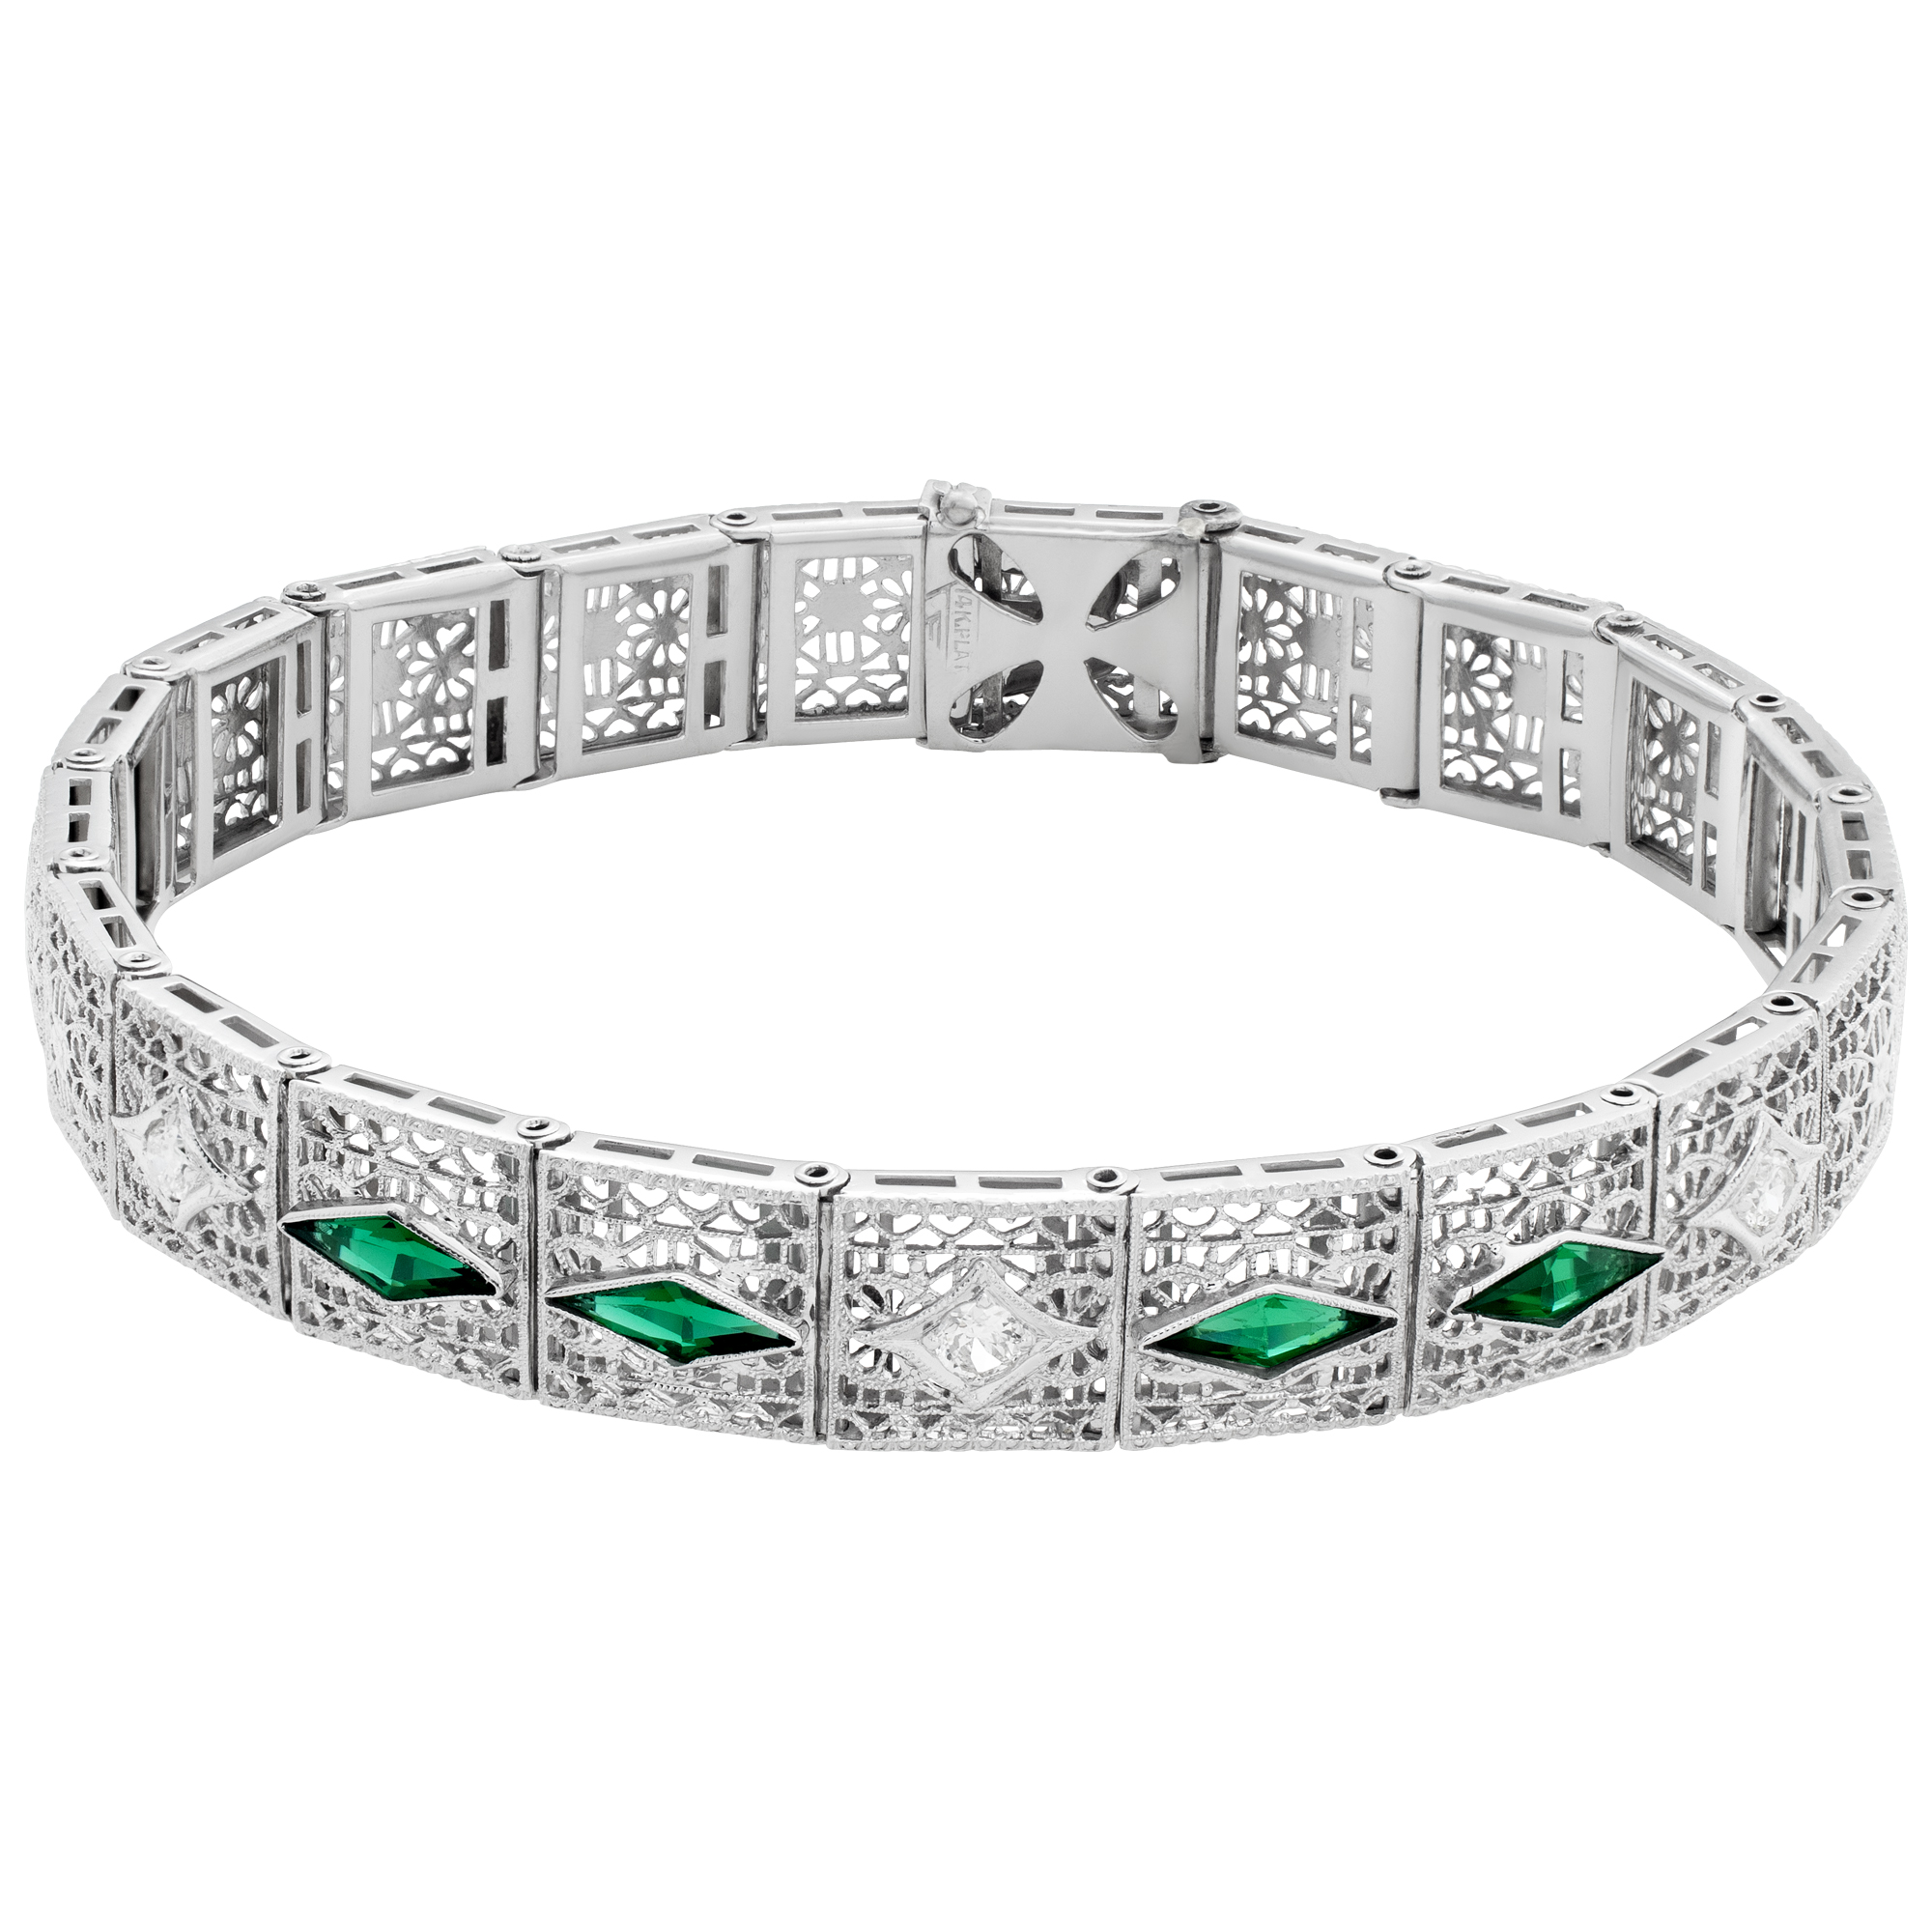 Elegant filigree line bracelet with diamonds and synthetic emeralds set in 14k white gold, with platinum top image 1